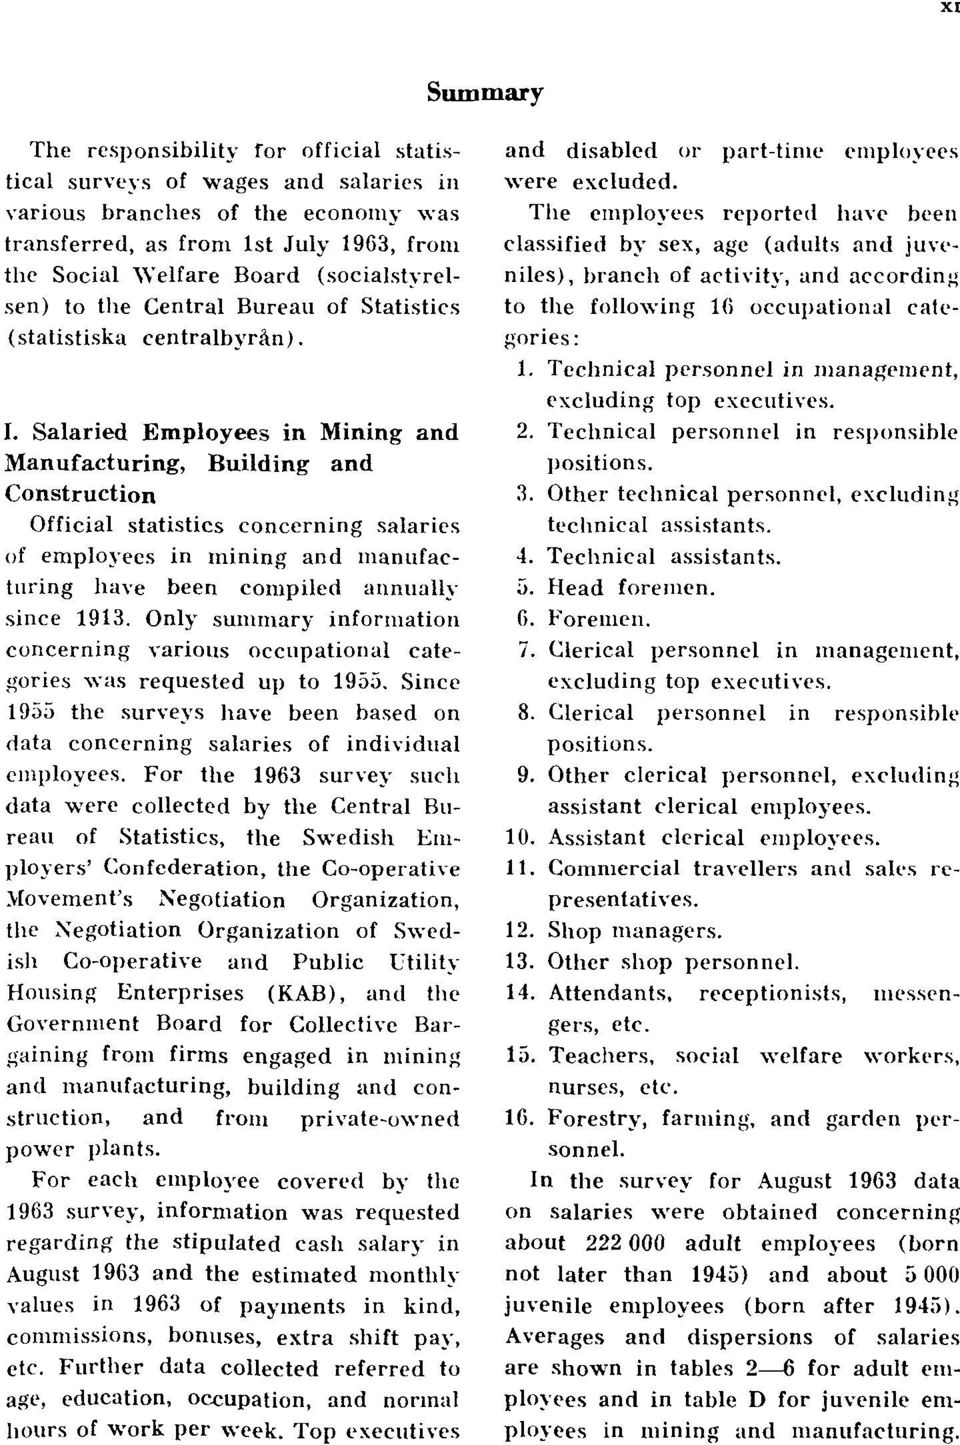 Salaried Employees in Mining and Manufacturing, Building and Construction Official statistics concerning salaries of employees in mining and manufacturing have been compiled annually since 1913.